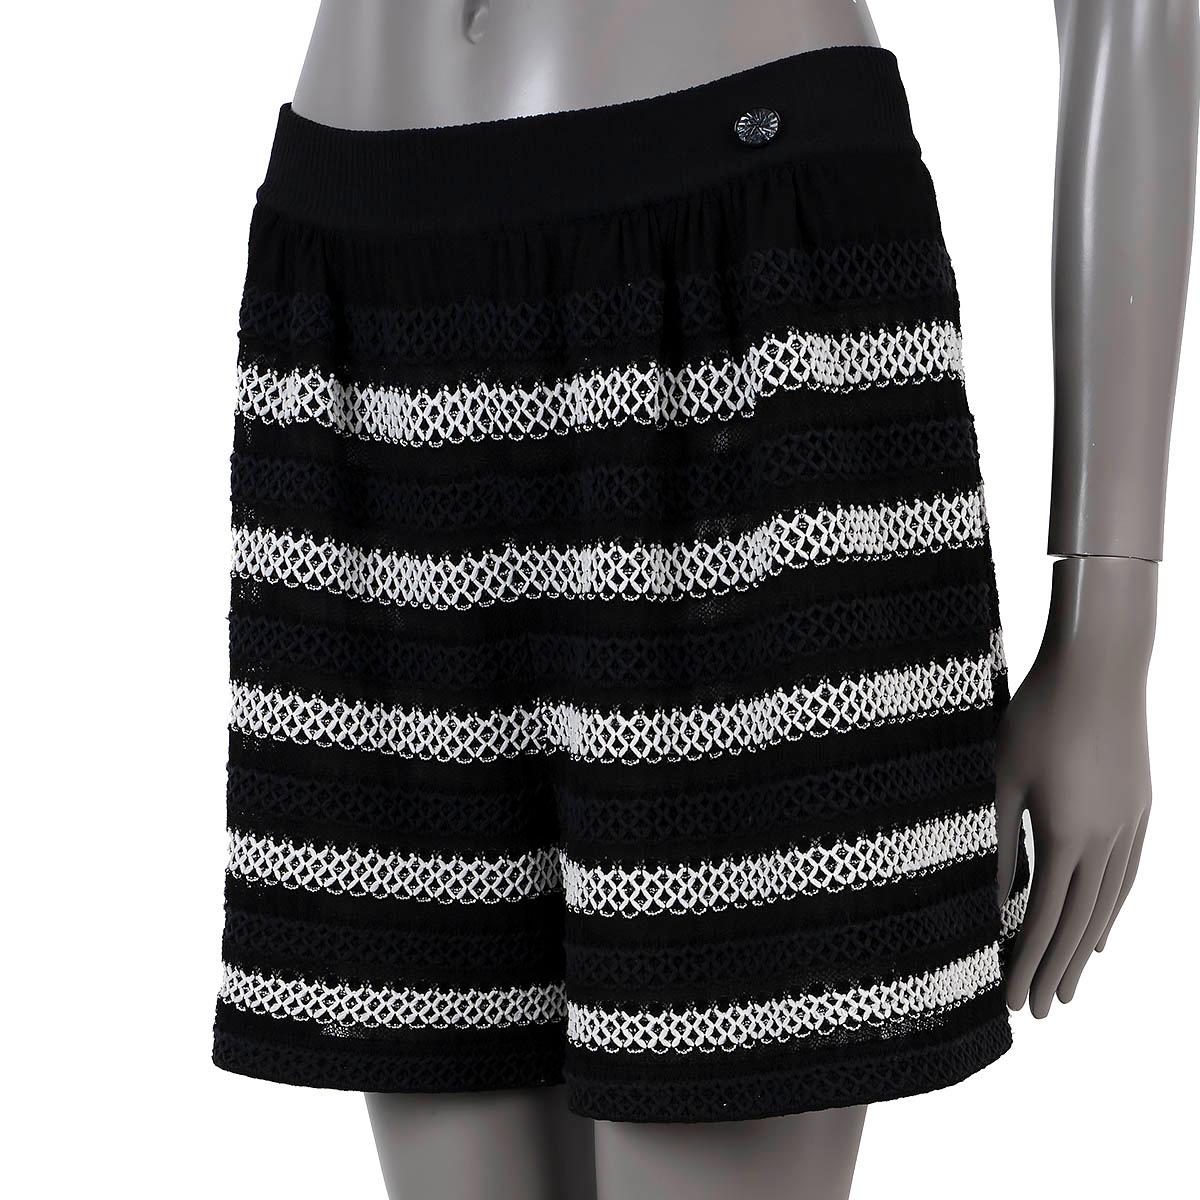 100% authentic Chanel striped knit shorts in black, blue and white viscose (53%), polyamide (28%) and polyester (19%) with an elastic band. Has a black 'CC' emblem at the front. Unlined. Has been worn and is in excellent condition

2020 Paris - 31